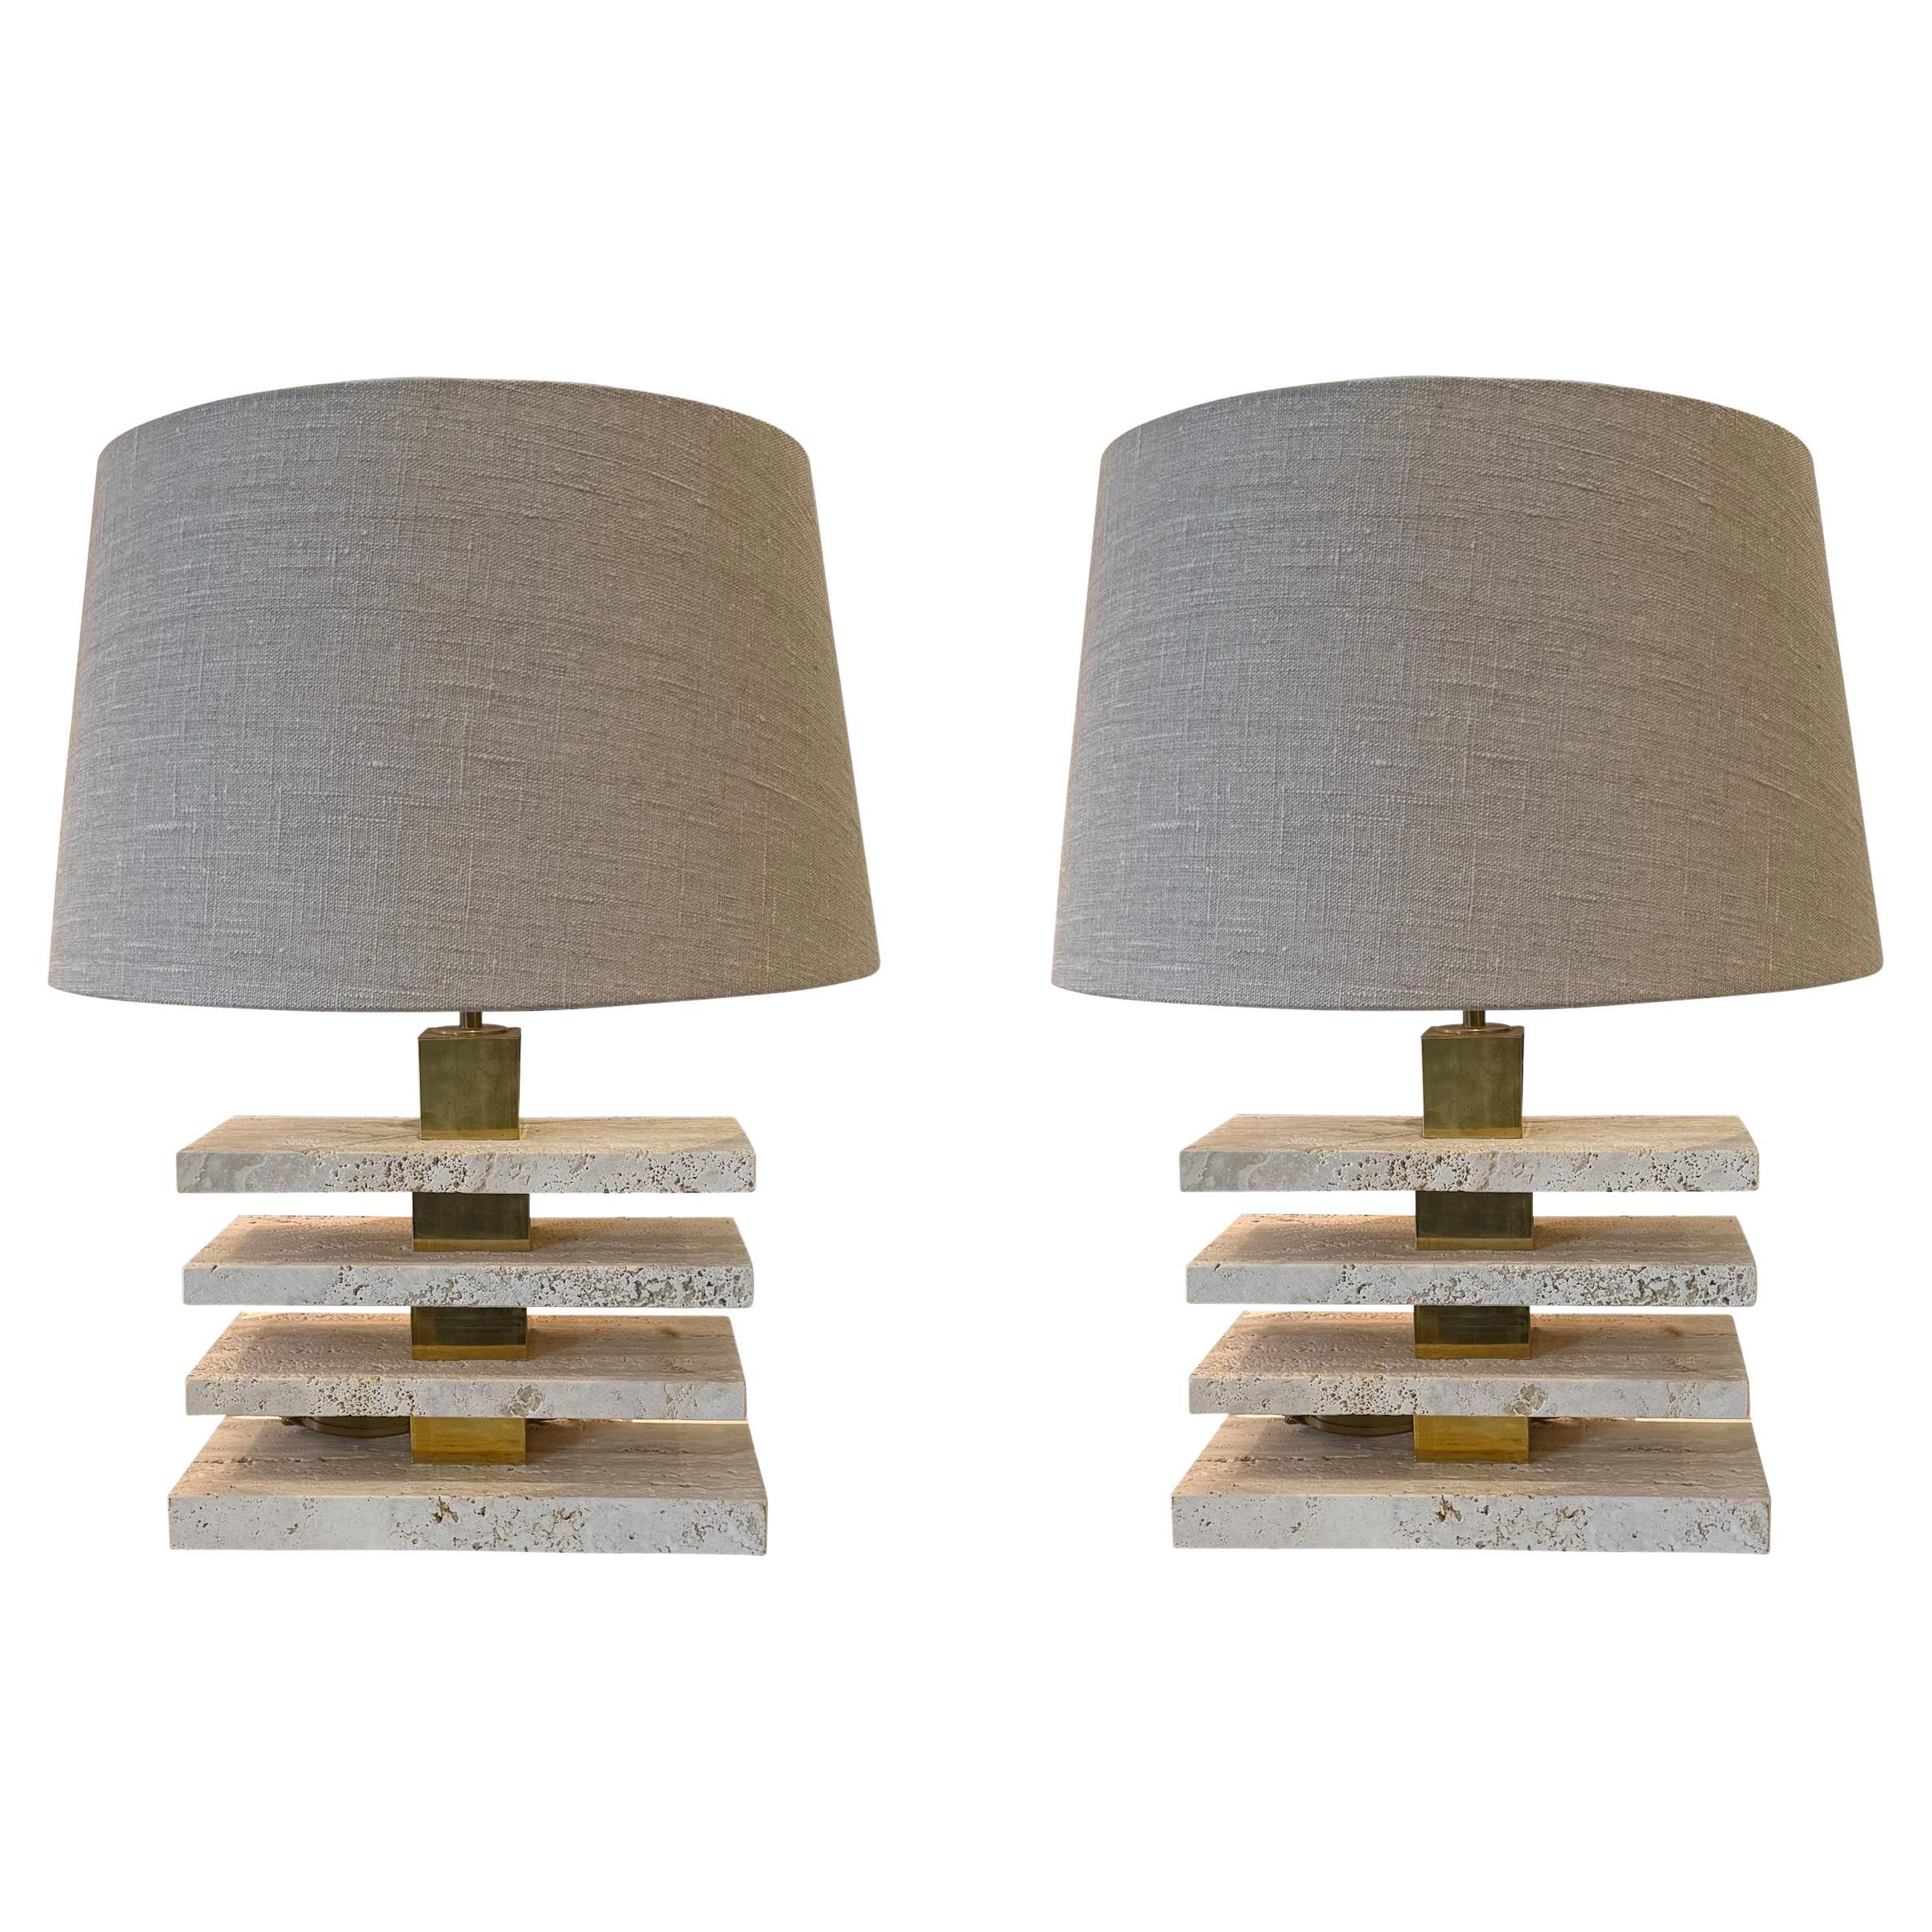 Travertine Pair Of Stacked Rectangular Shaped Lamps, Italy, Contemporary For Sale